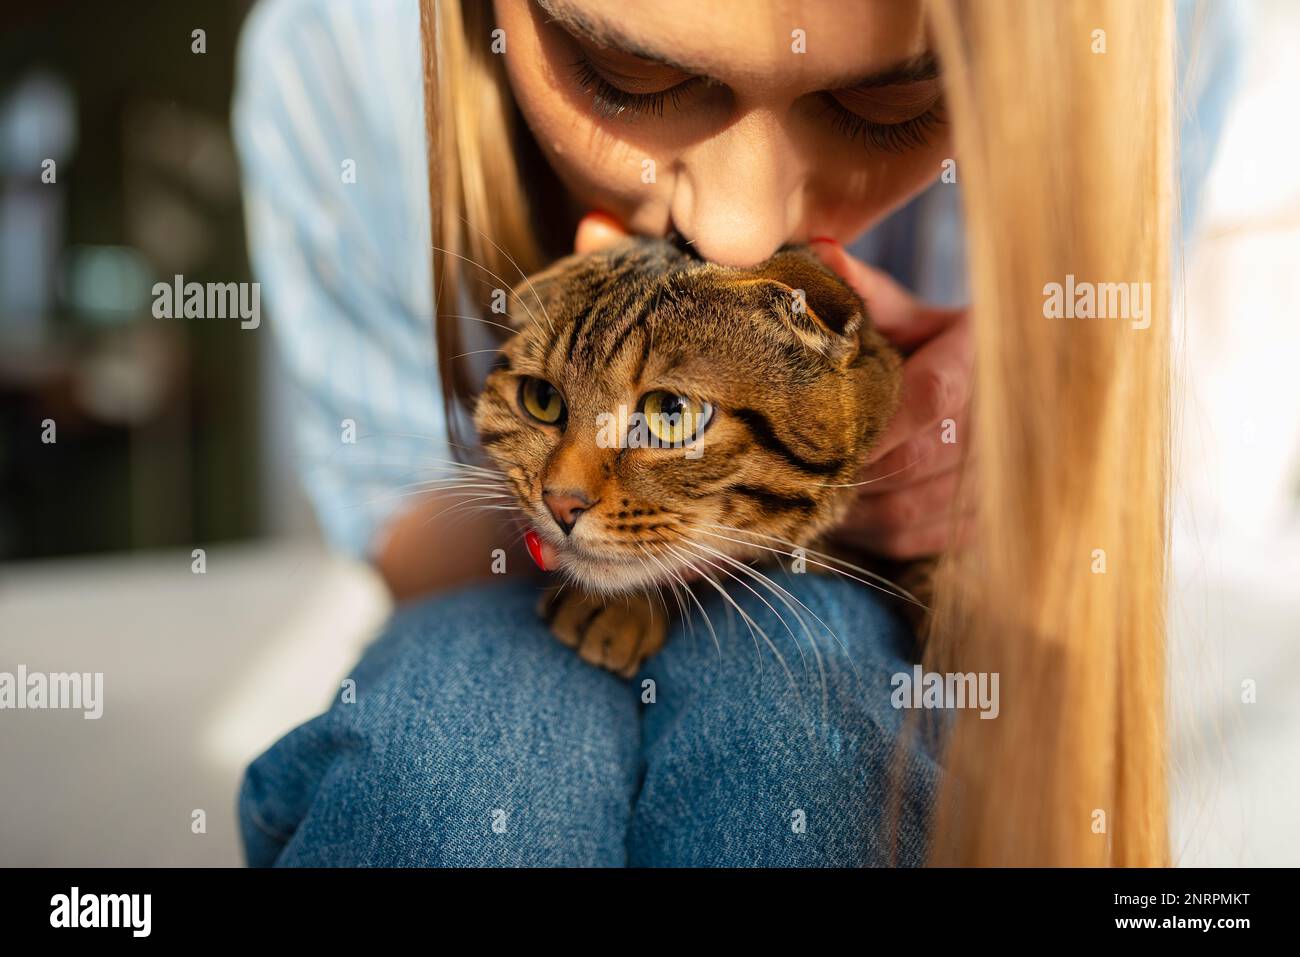 Cute young Blonde Woman Holds a Cute Green-eyed Scottish Tabby Cat Who sits on her lap in her arms and hugs it, concept of loving and caring  for pets Stock Photo